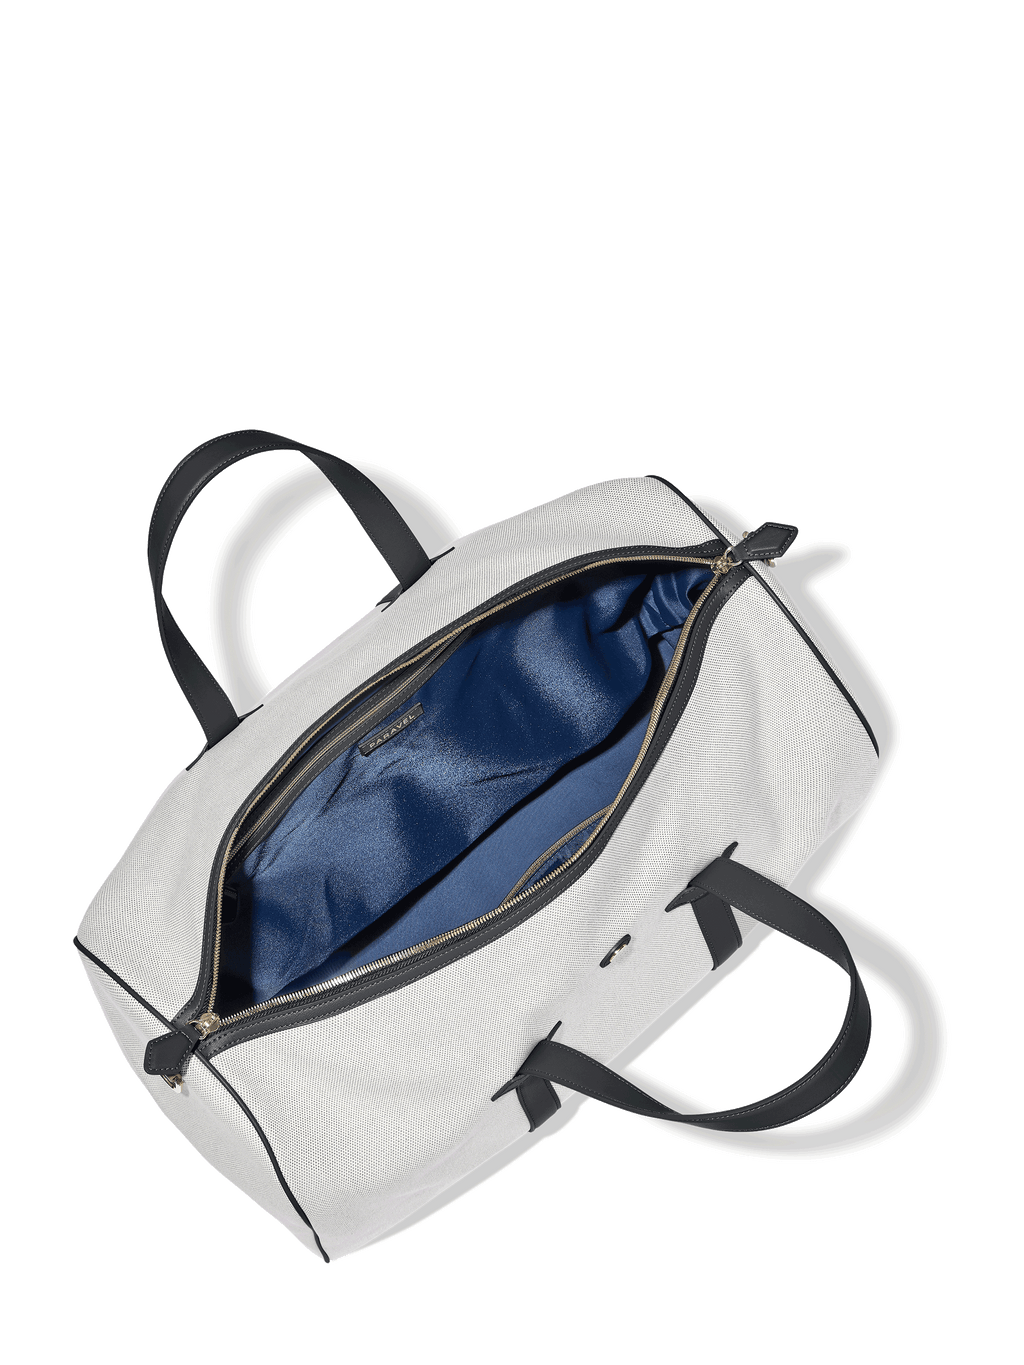 Luxury Duffel Bag Coated Canvas White Colorz